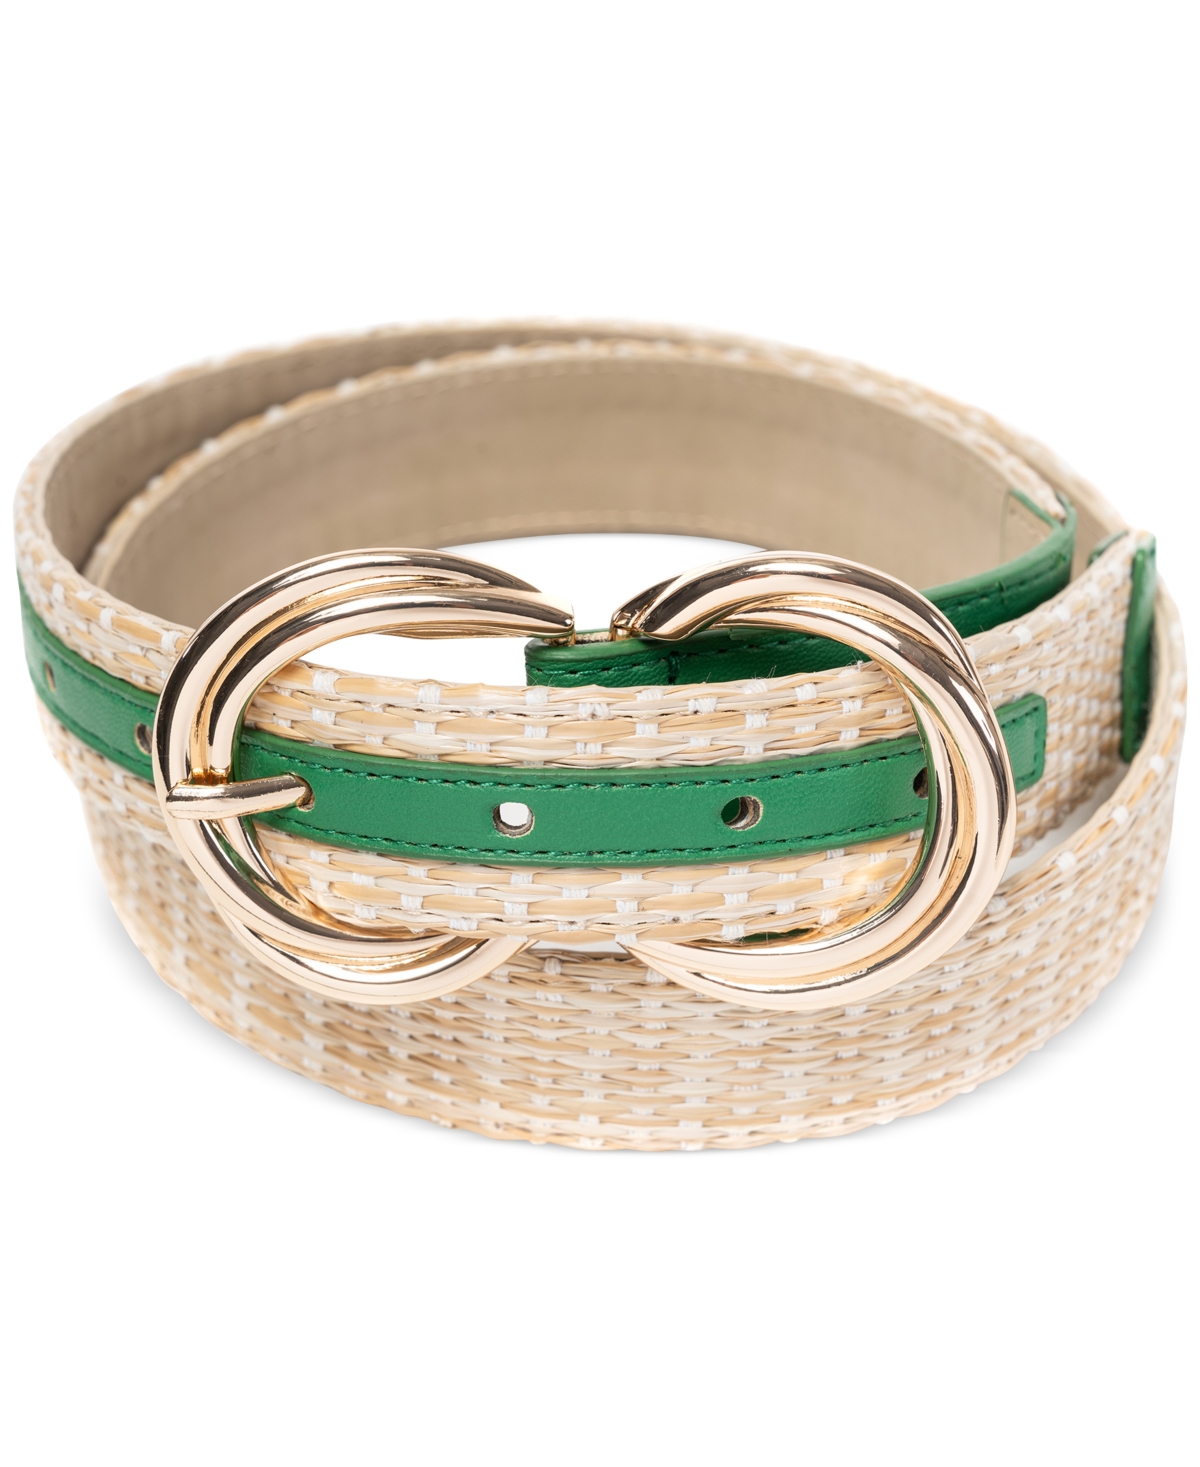 Women's Mixed-Media Double-Buckle Belt, Created for Macy's - Green